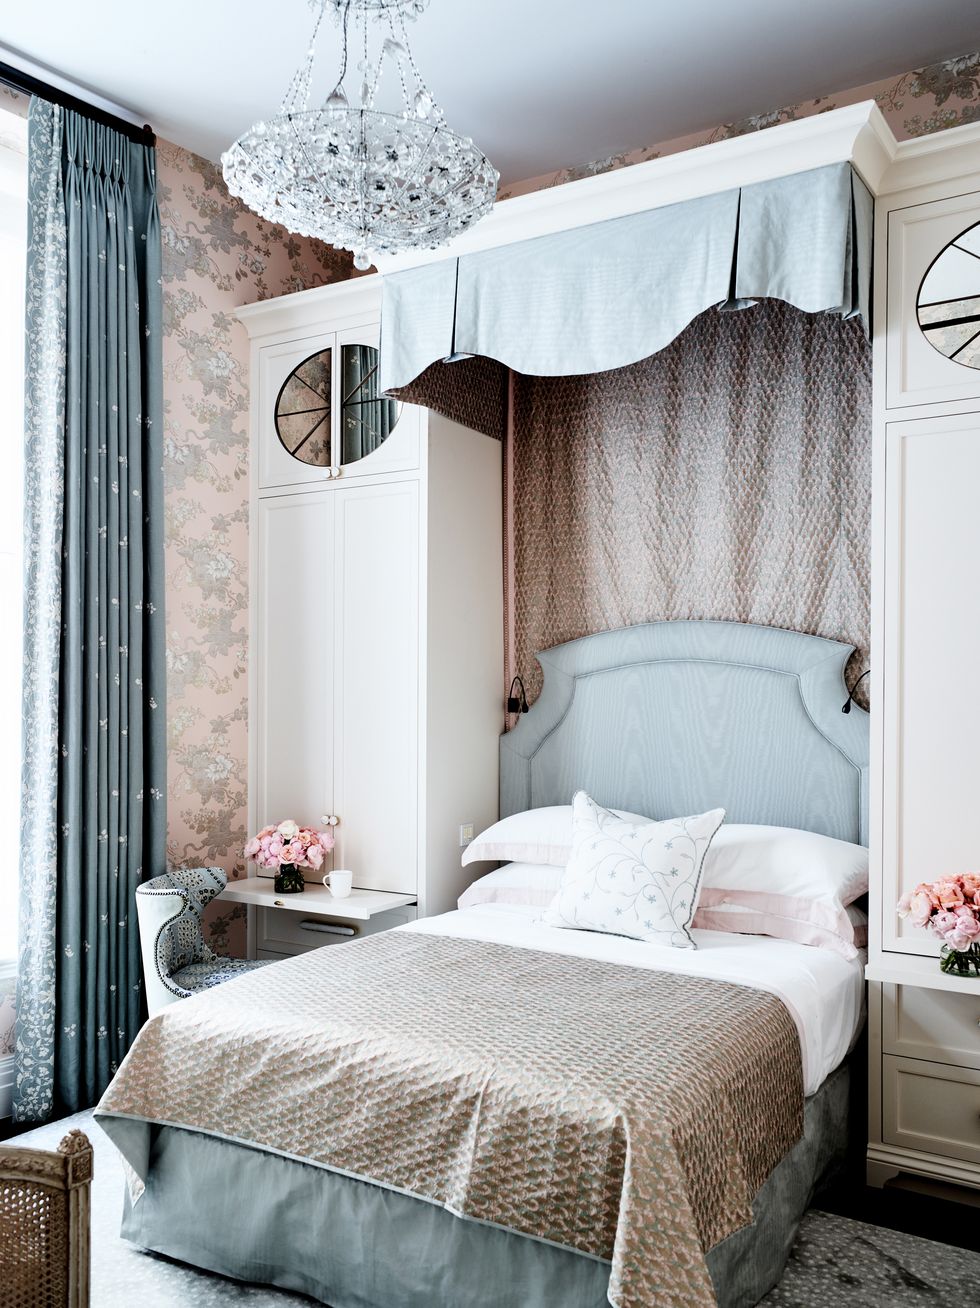 small bed with blue upholstered headboard and canopy tucked in between two tall white closets on either side with doors and round mirrors and trays that slide out at bed level to act as a nightstand